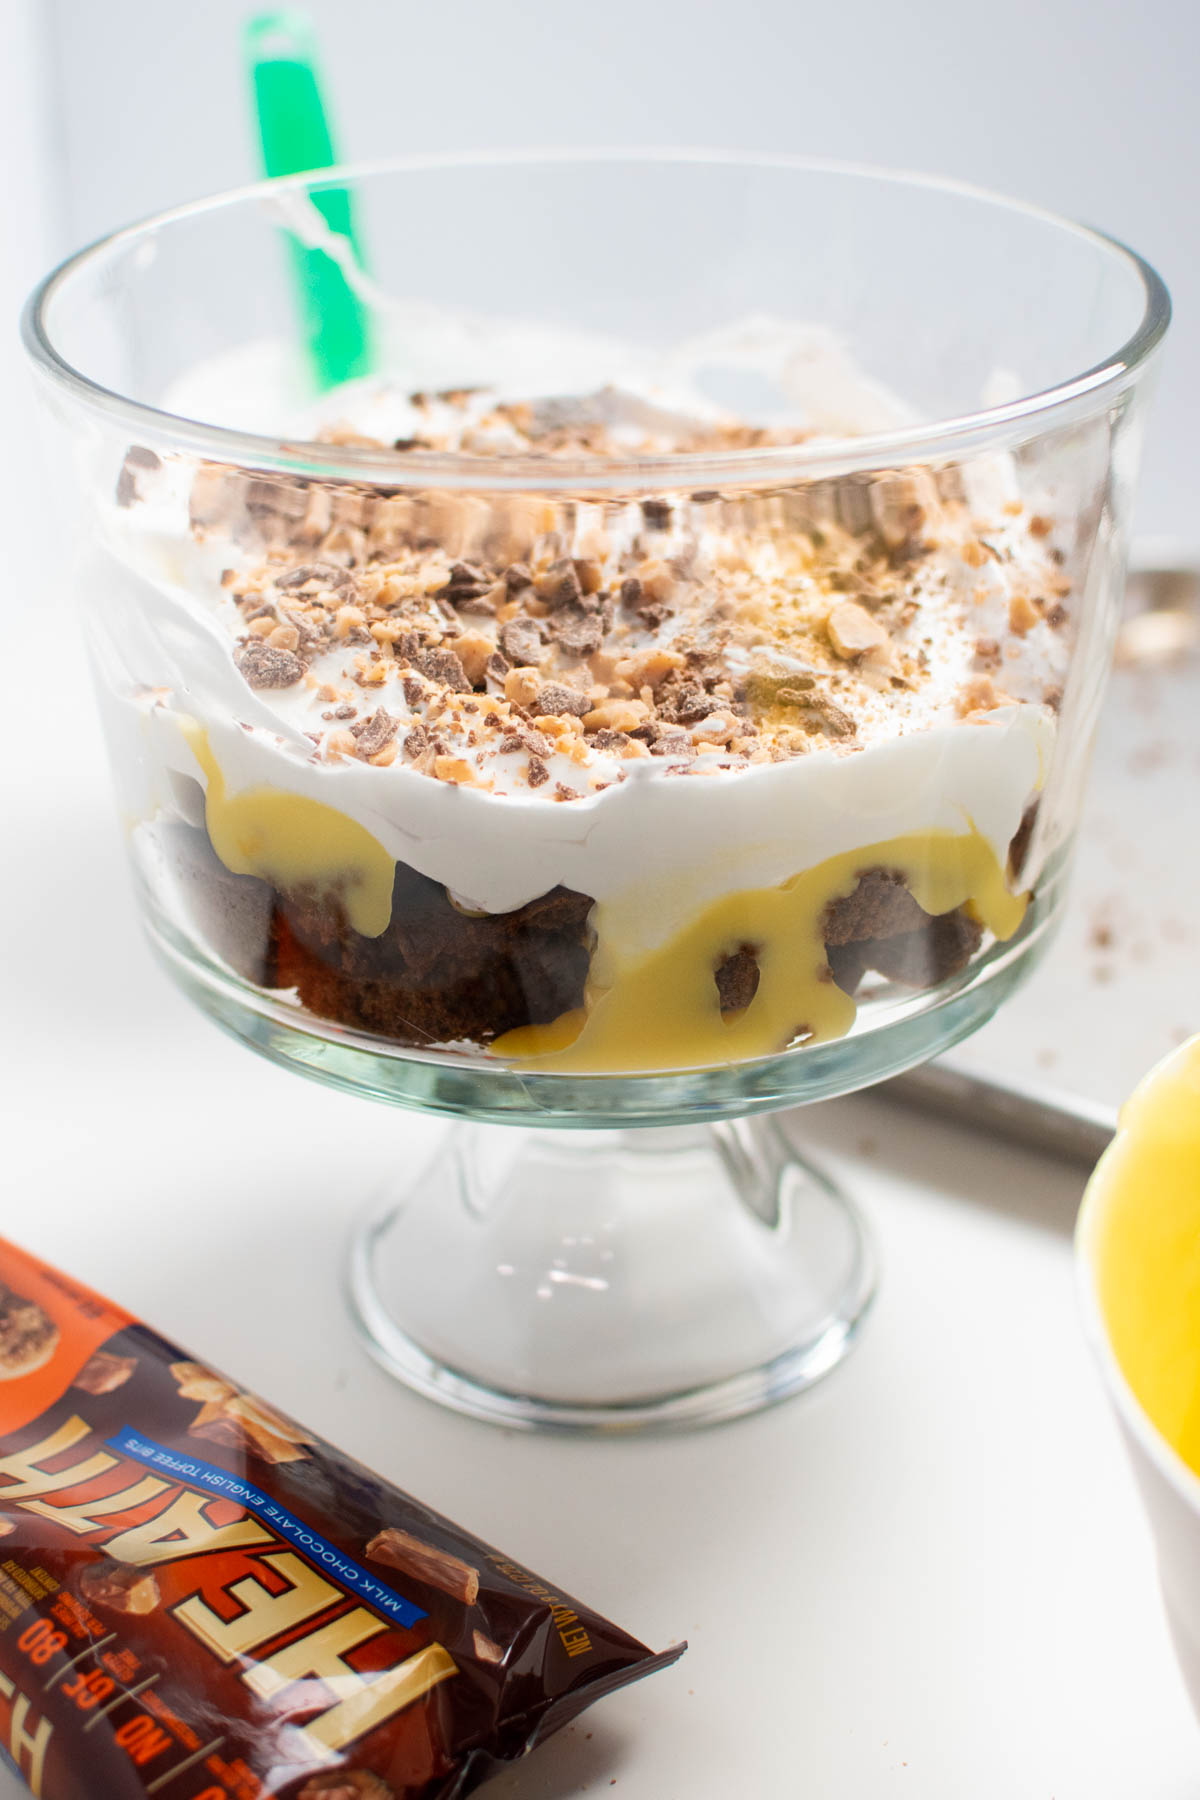 One layer of gingerbread trifle with whipped cream in glass serving bowl with bag of toffee bits nearby.